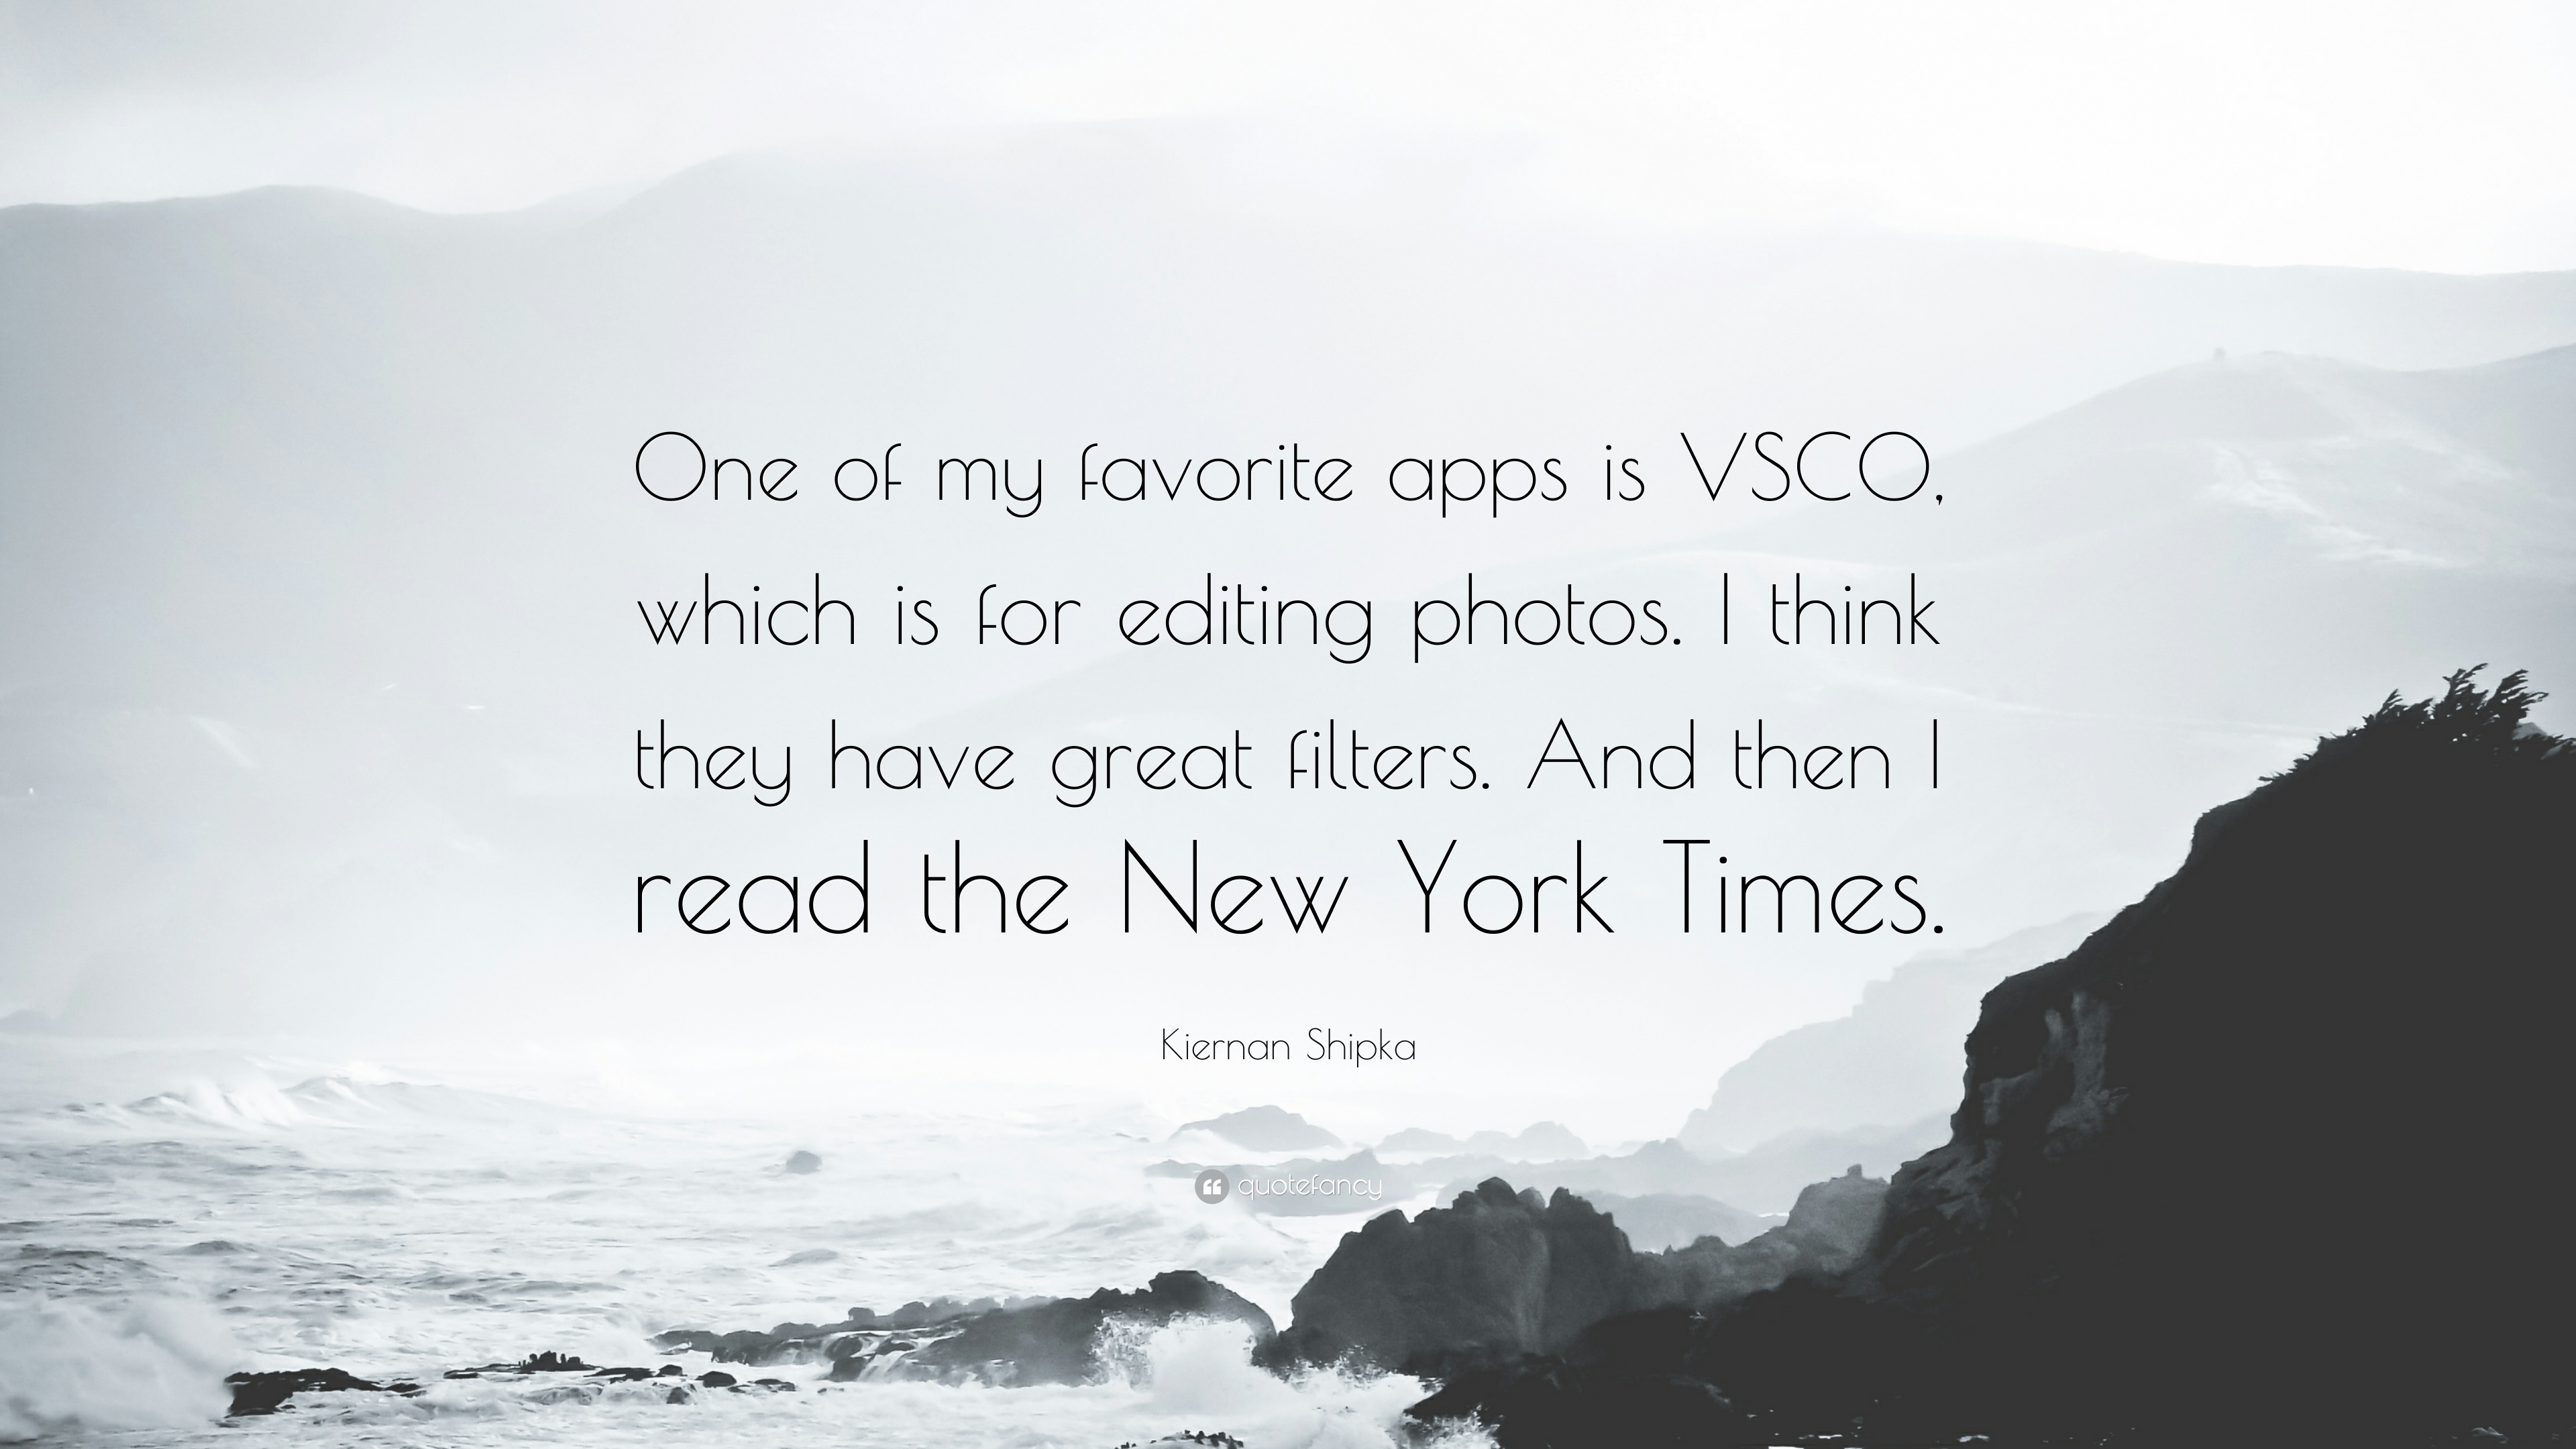 Kiernan Shipka Quote: “One of my favorite apps is VSCO, which is for